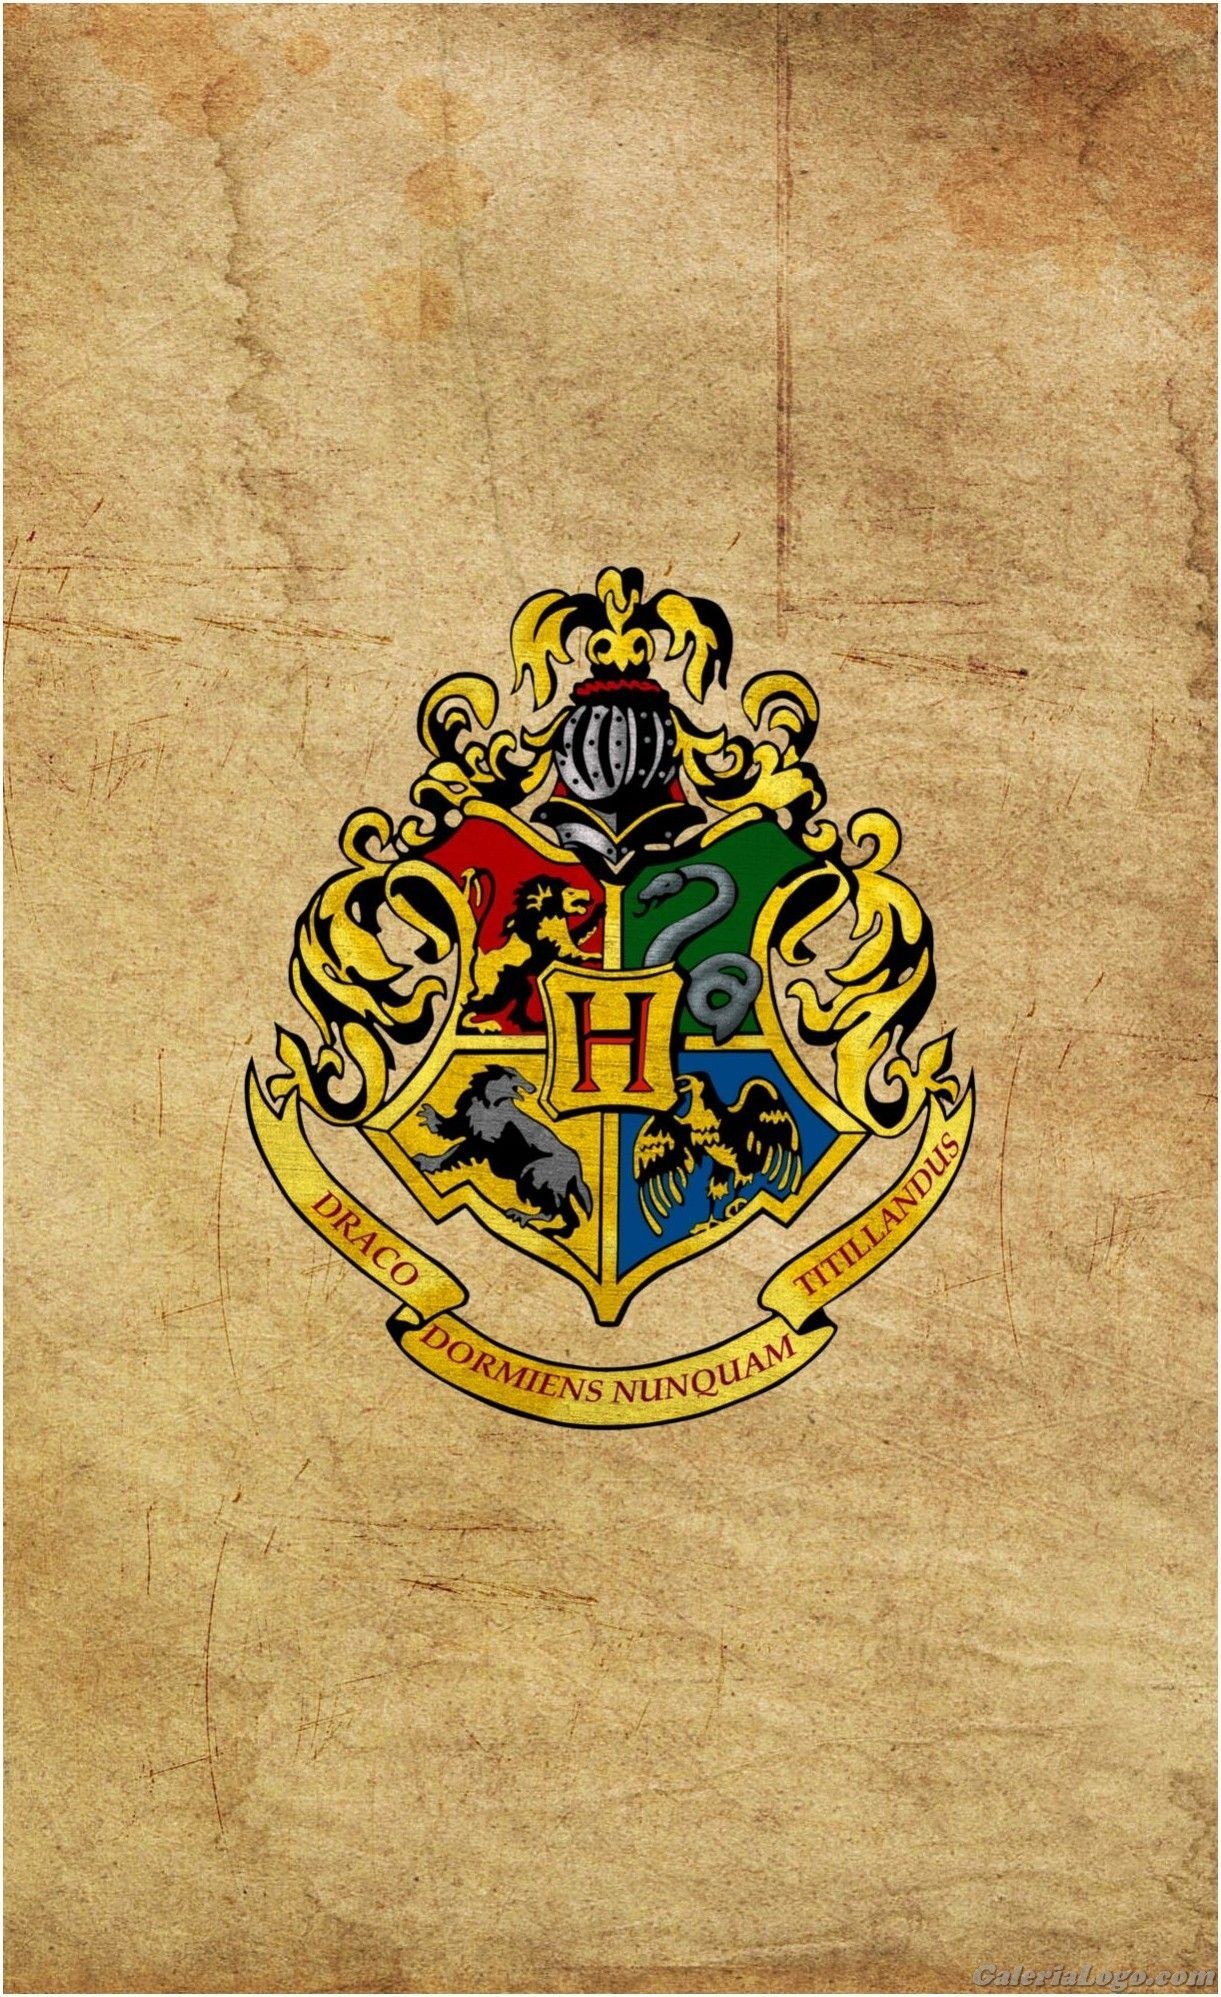 iPhone wallpaper, Harry Potter background, Phone decor, Movie-inspired, 1230x2000 HD Phone